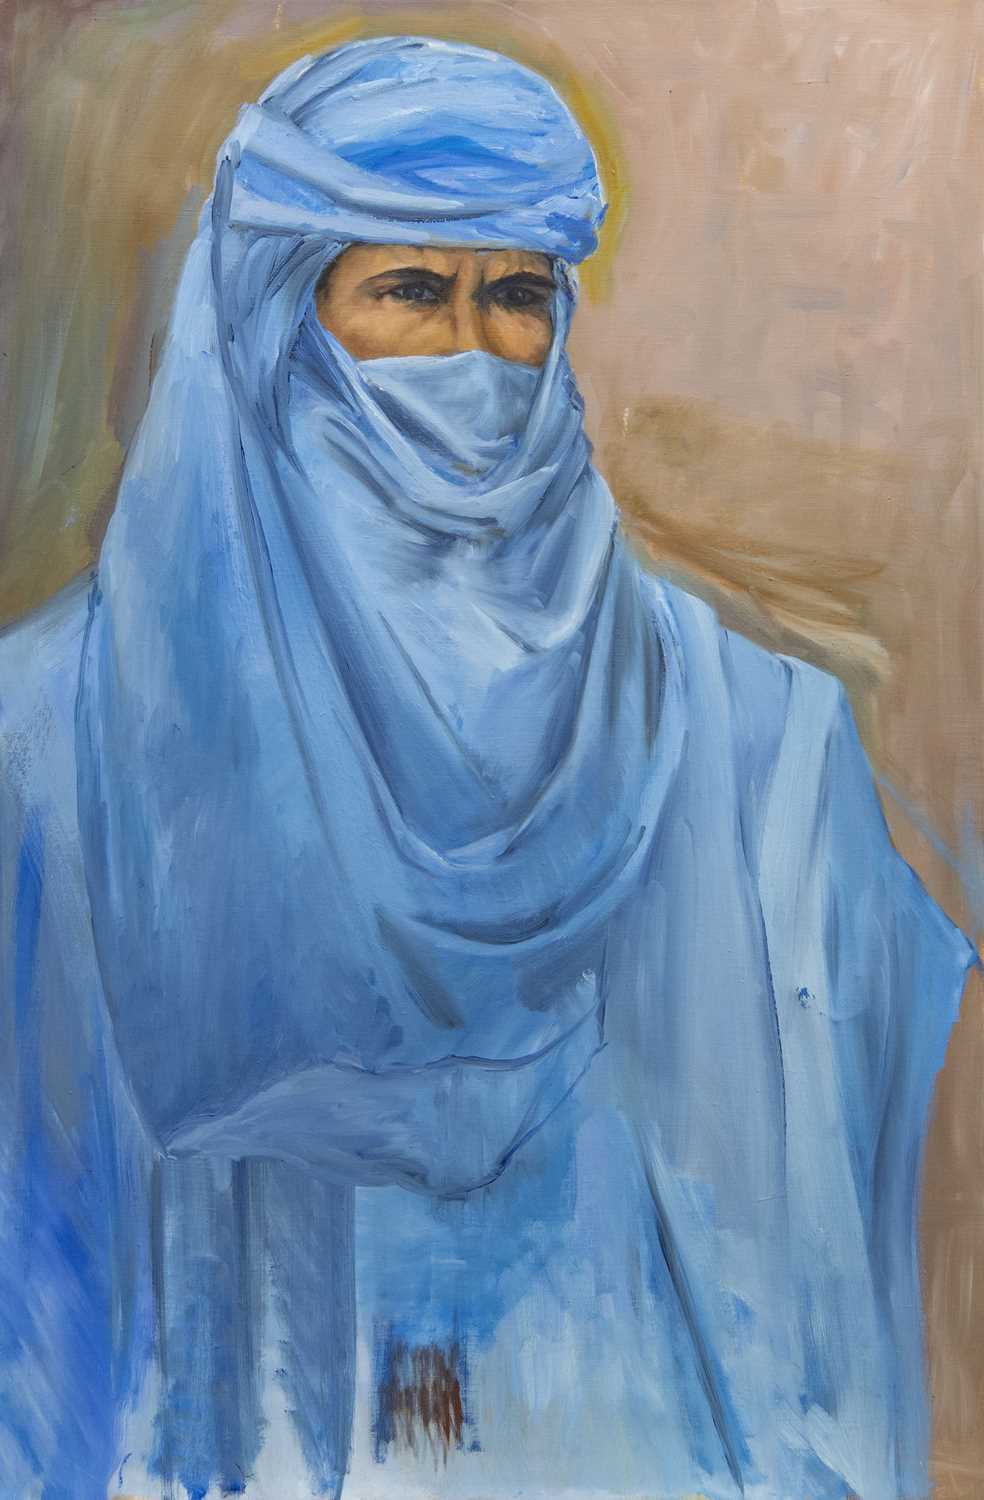 Lot 504 - THE MAN IN BLUE, AN OIL PAINTING